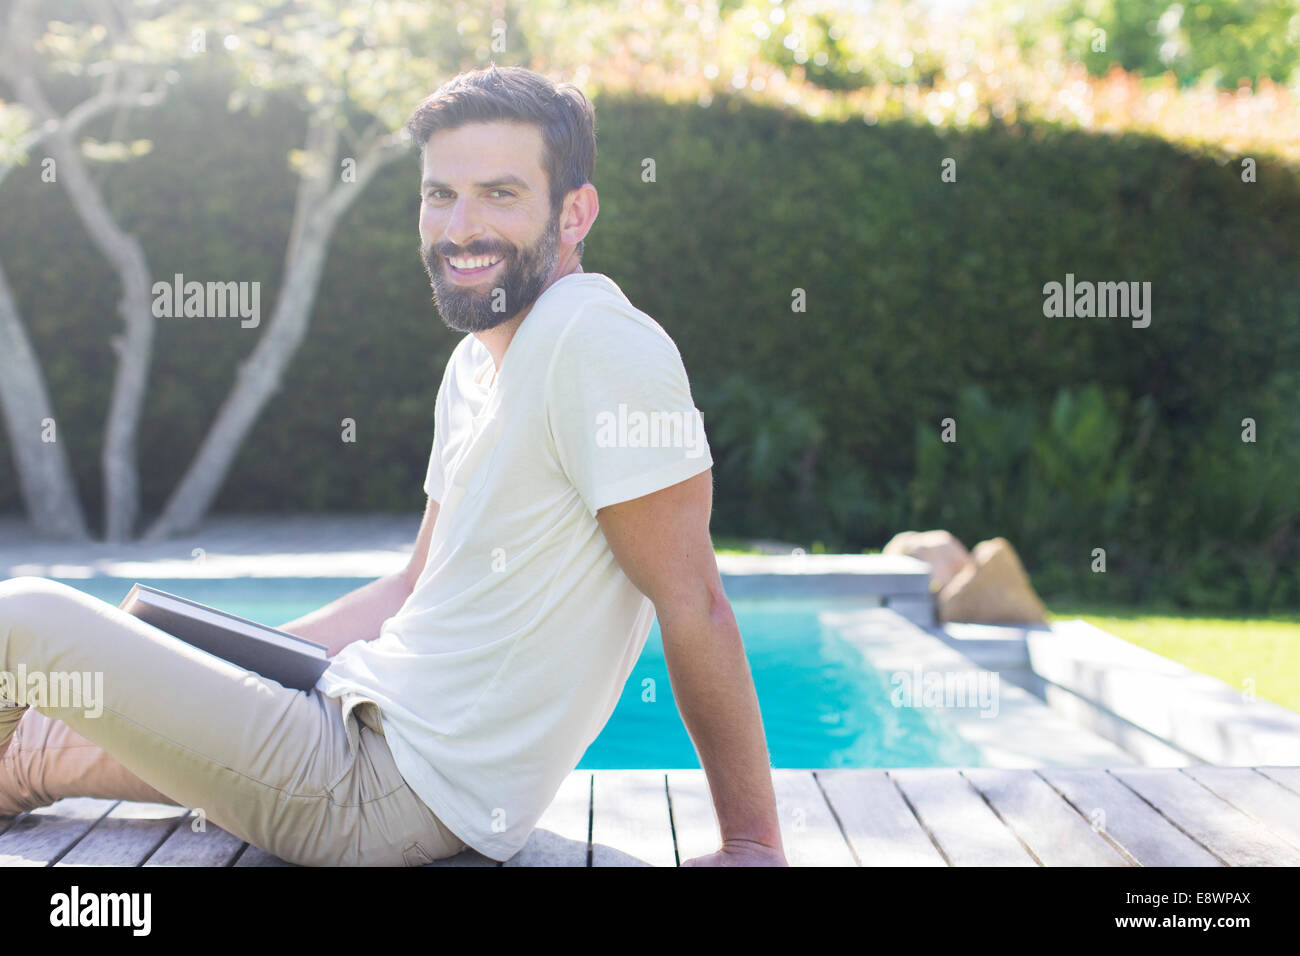 Smiling man relaxing on wooden deck by swimming pool Stock Photo